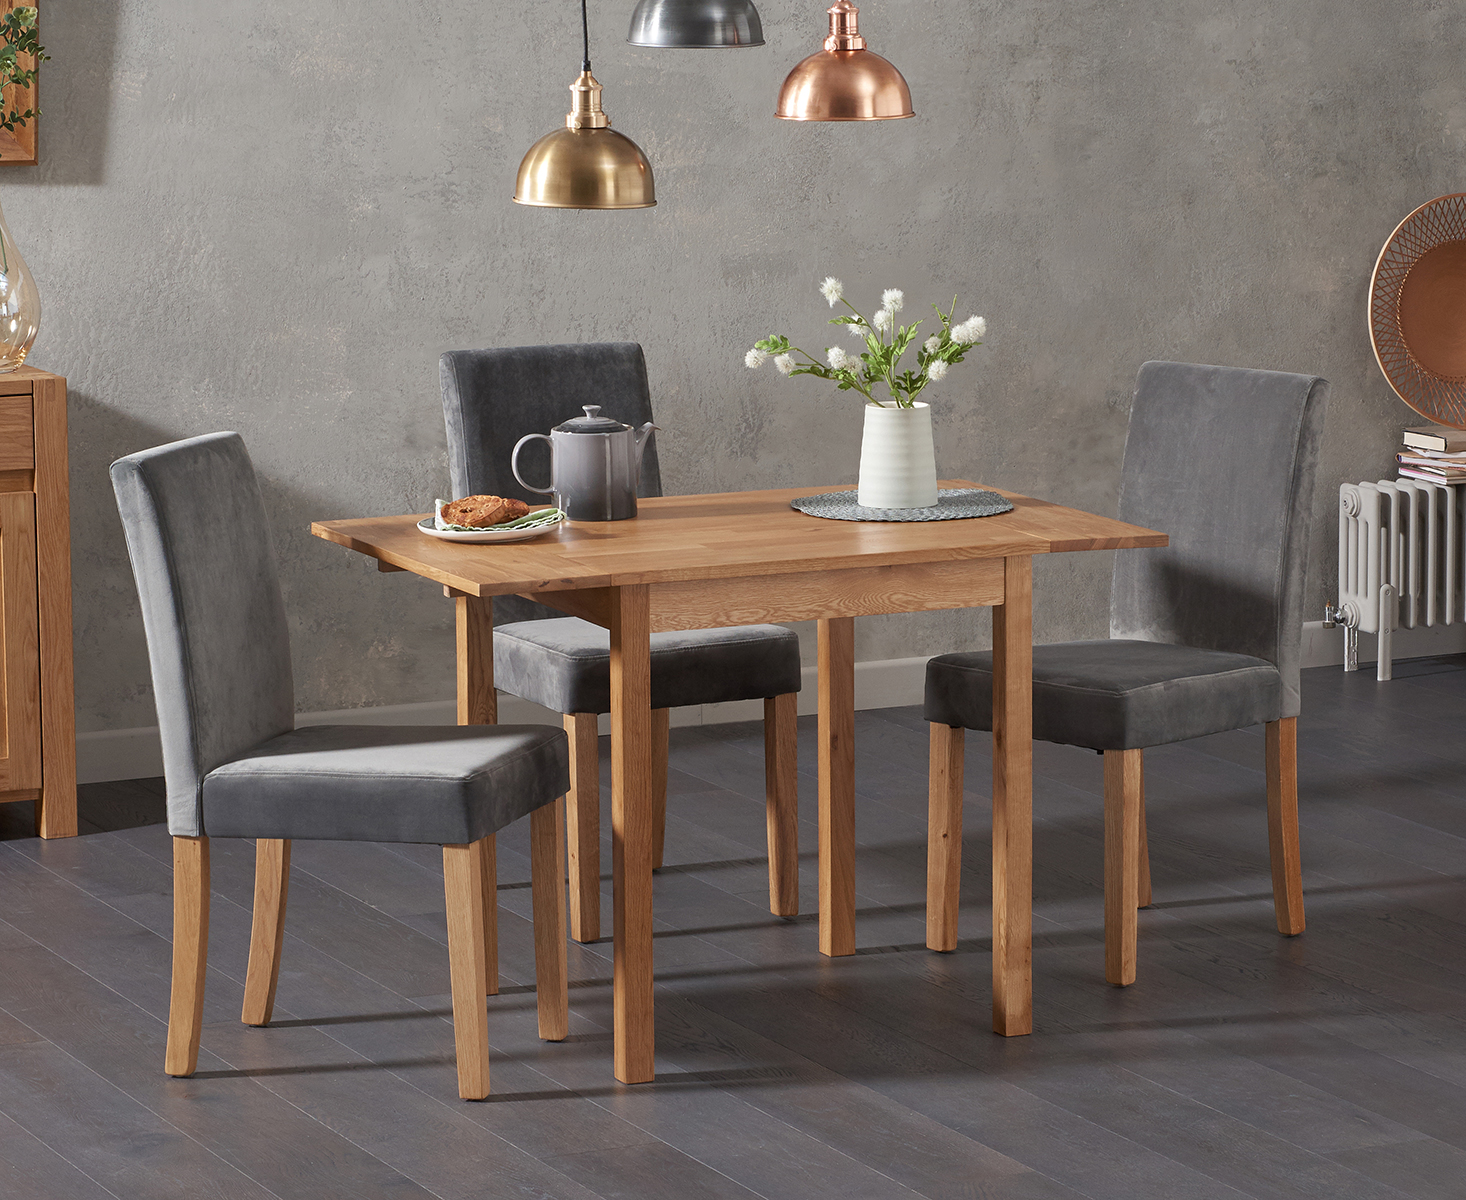 Oxford 70cm Solid Oak Extending Dining Table With 4 Grey Lila Plush Grey Chairs